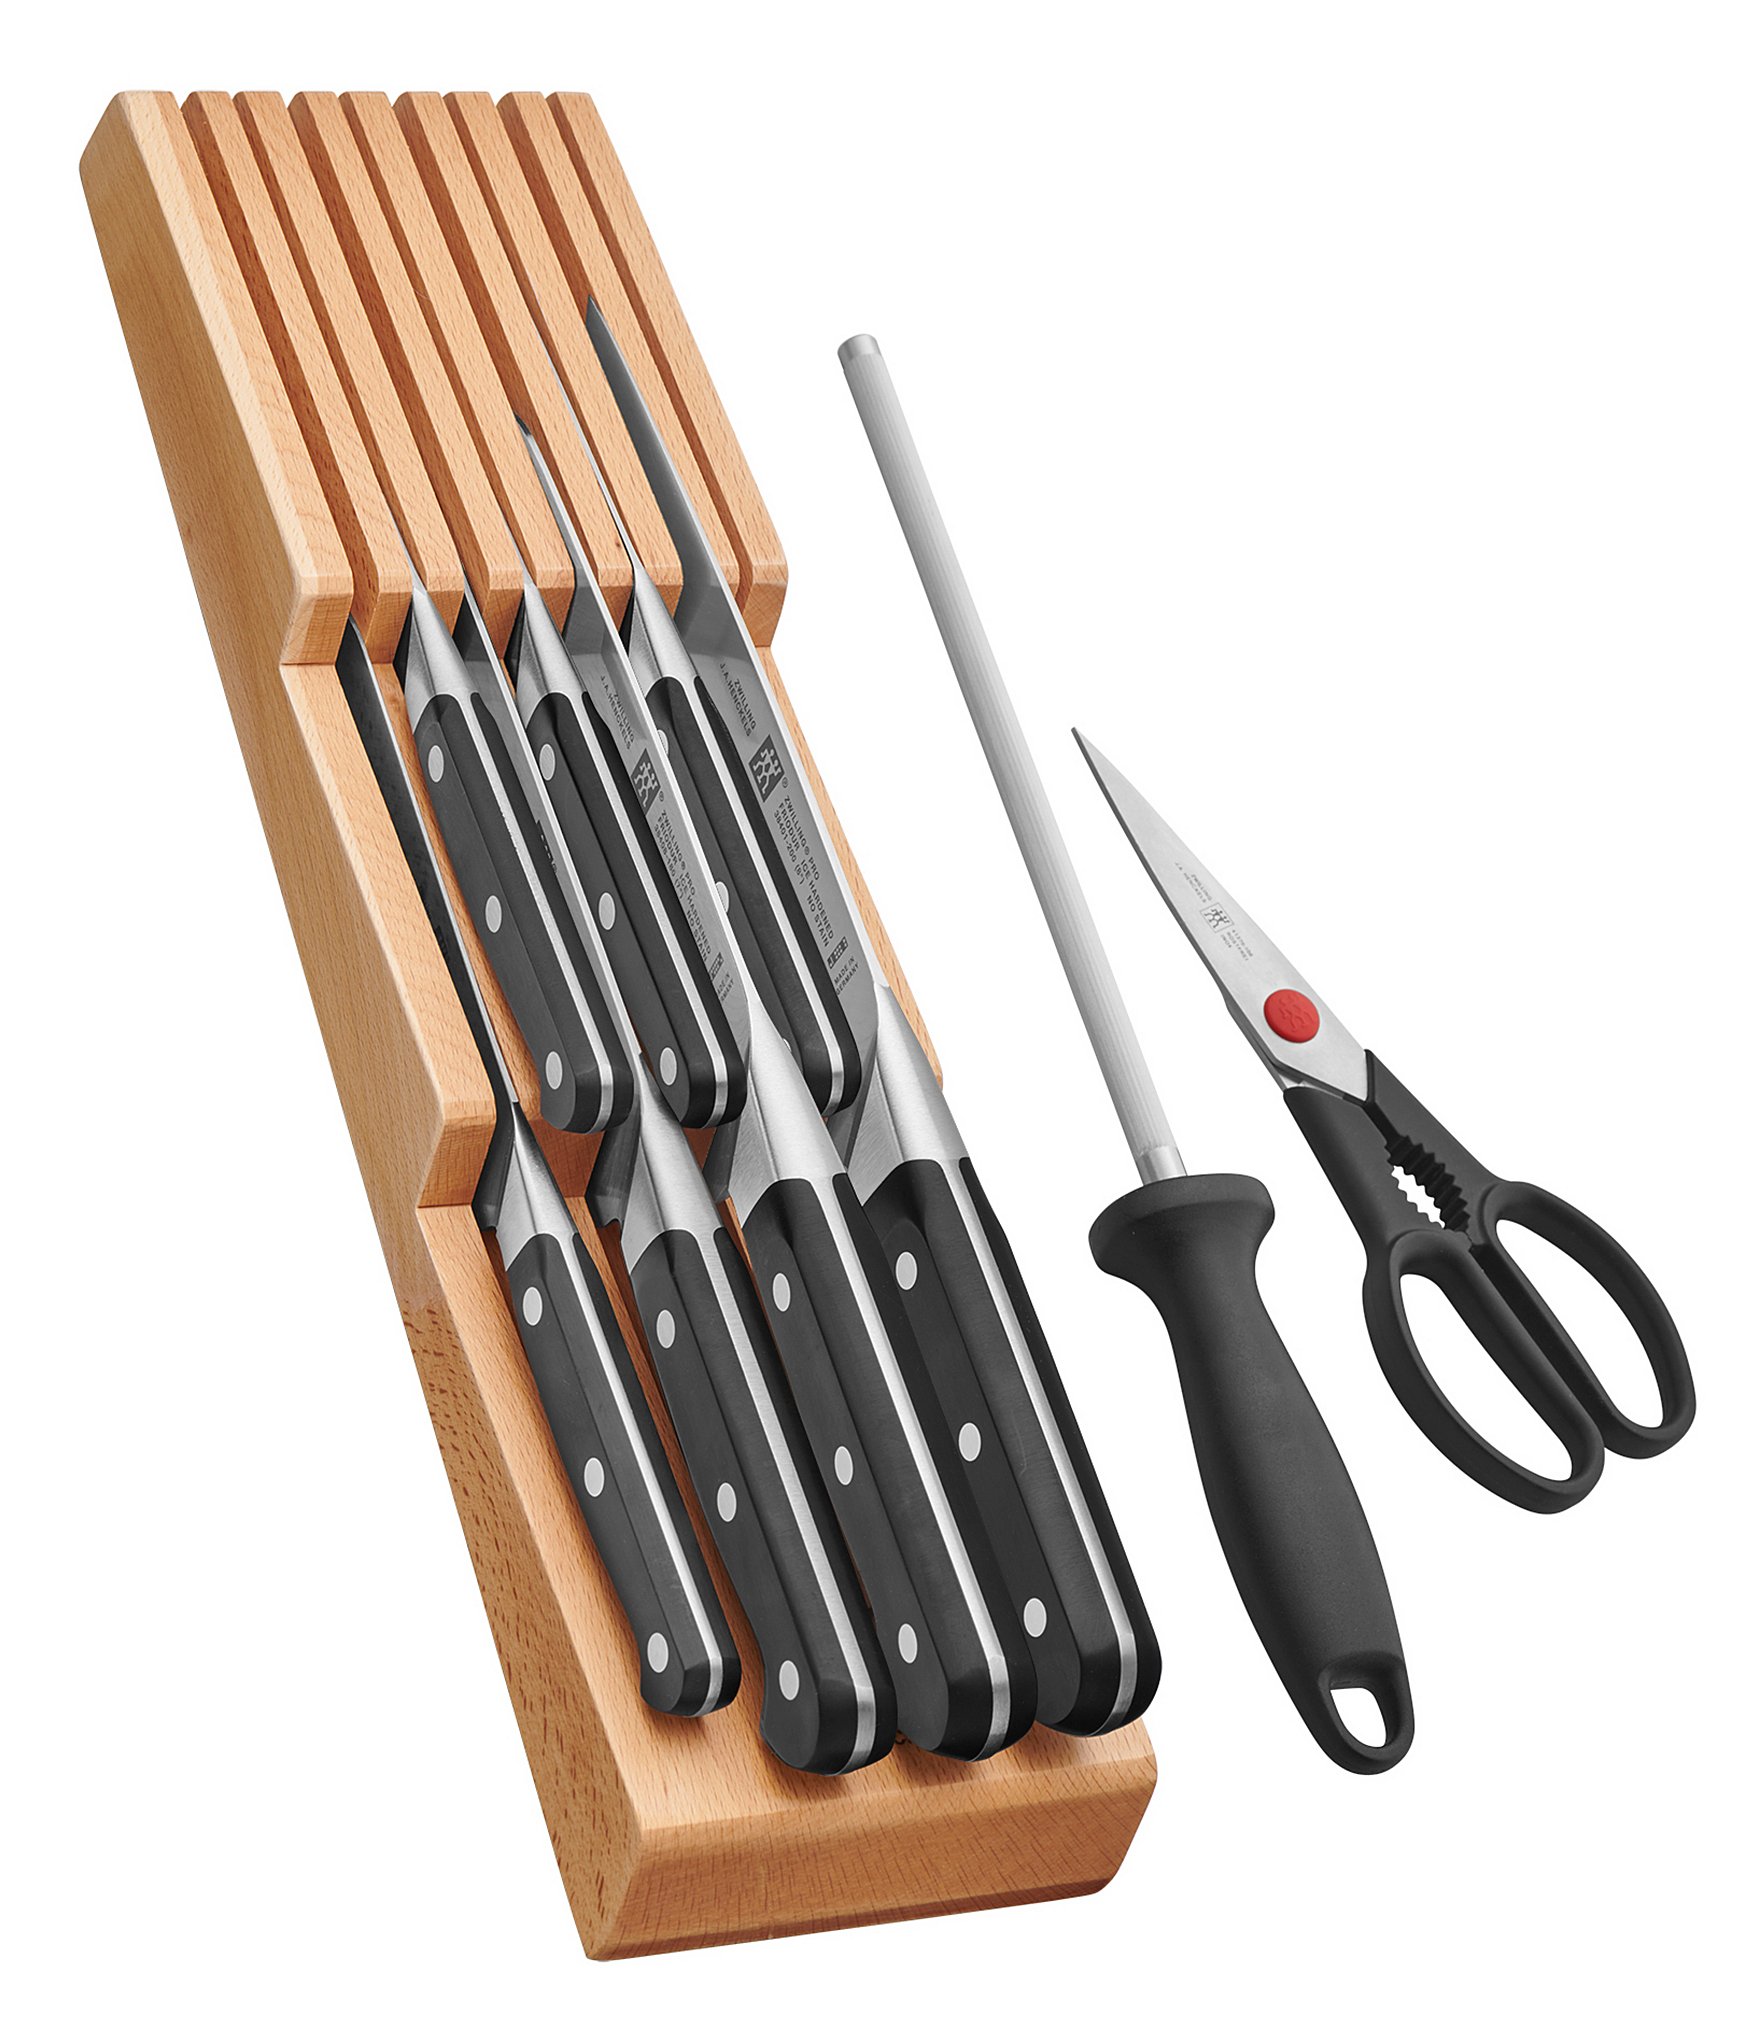 Zwilling J A Henckels Pro 10 Piece Knife Block Set With In Drawer